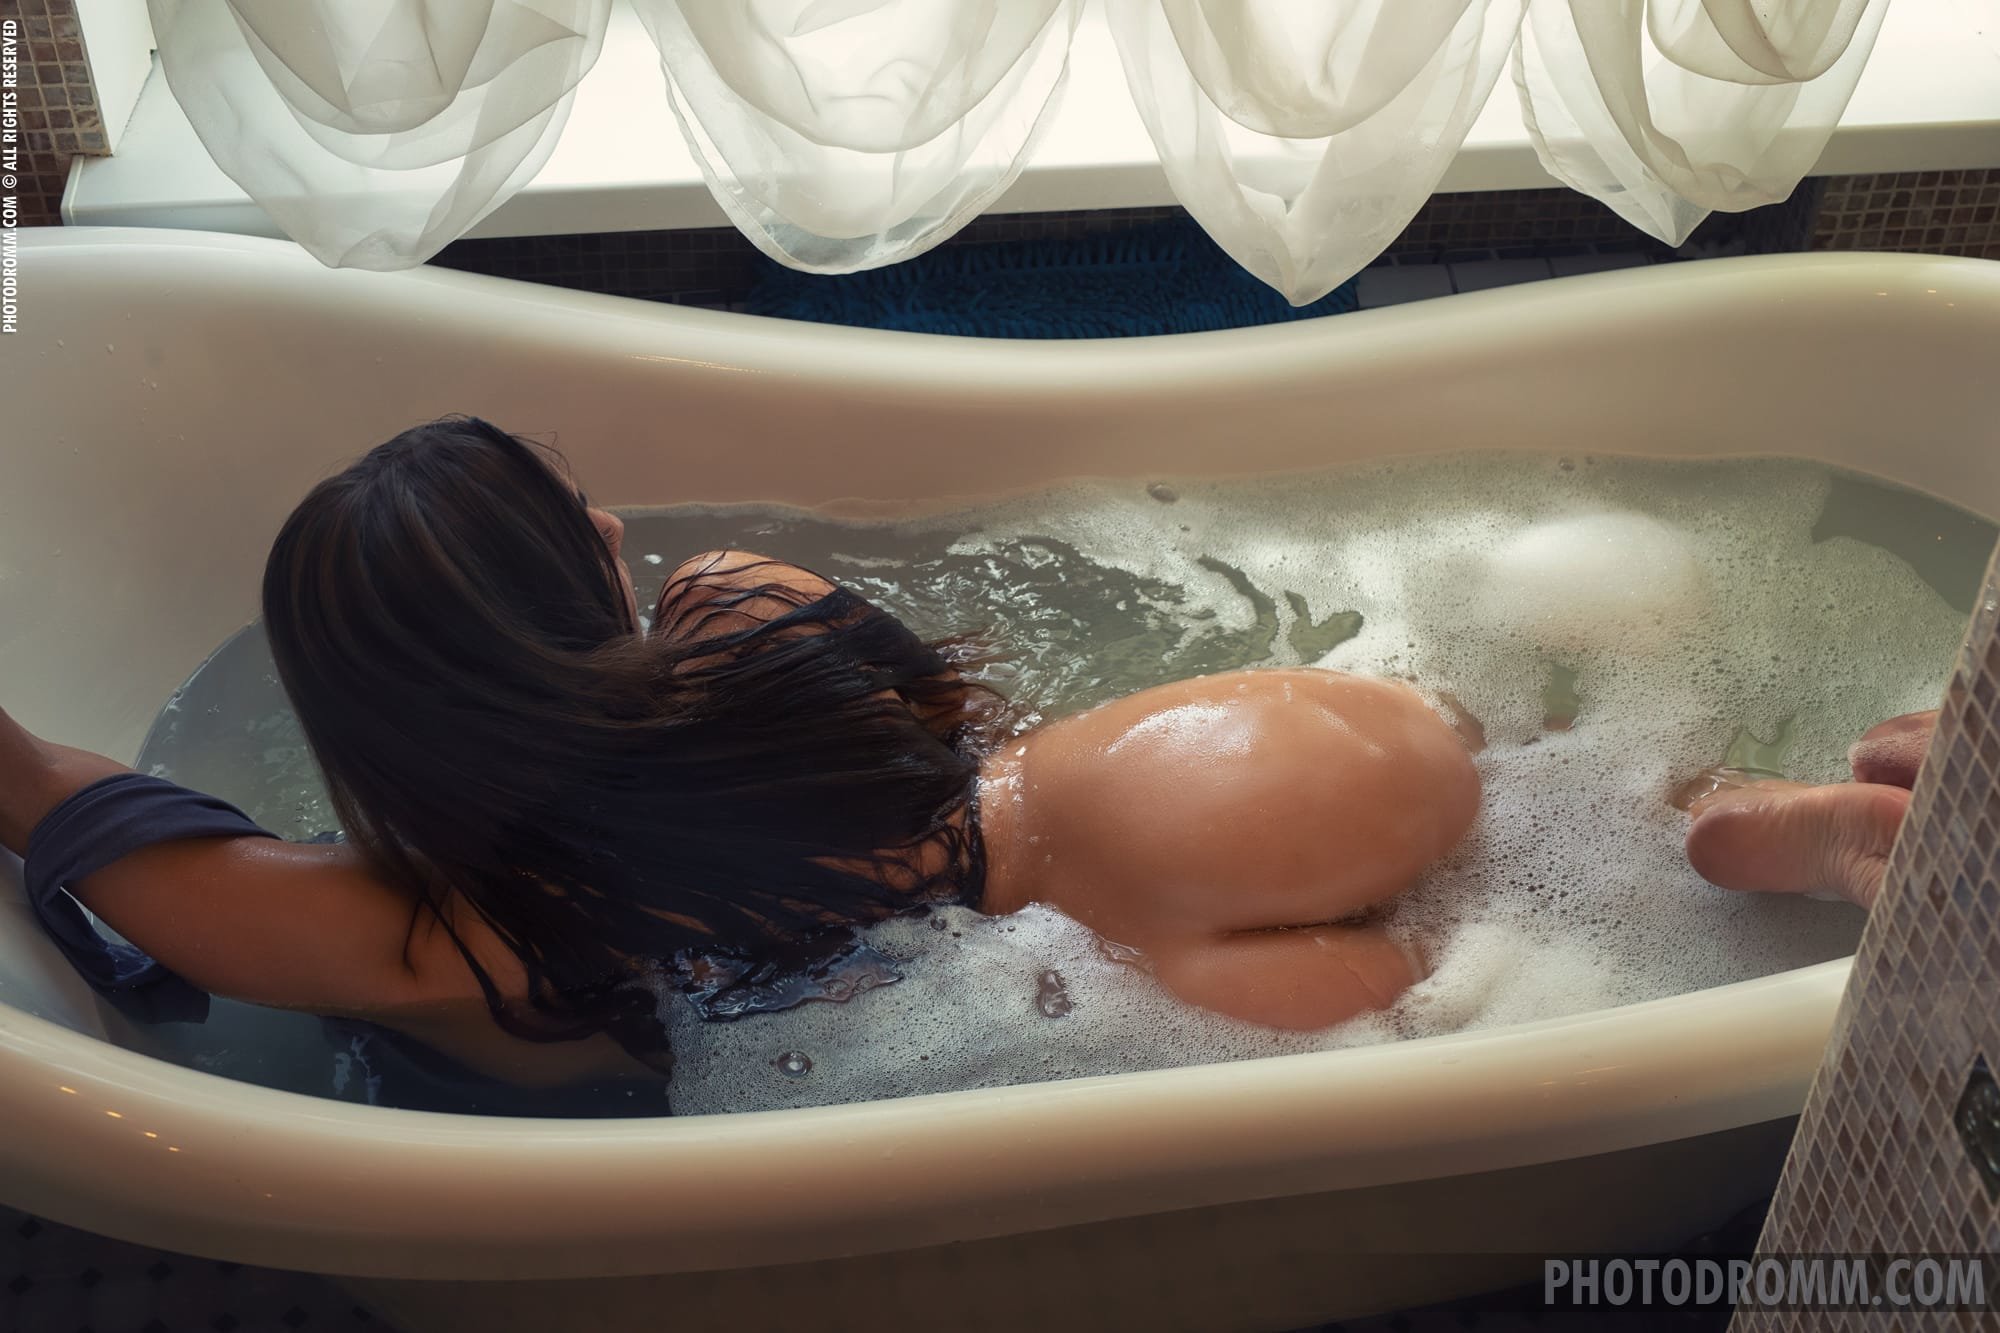 Magnificent Josephine removes her skin tight dress in the bath tub